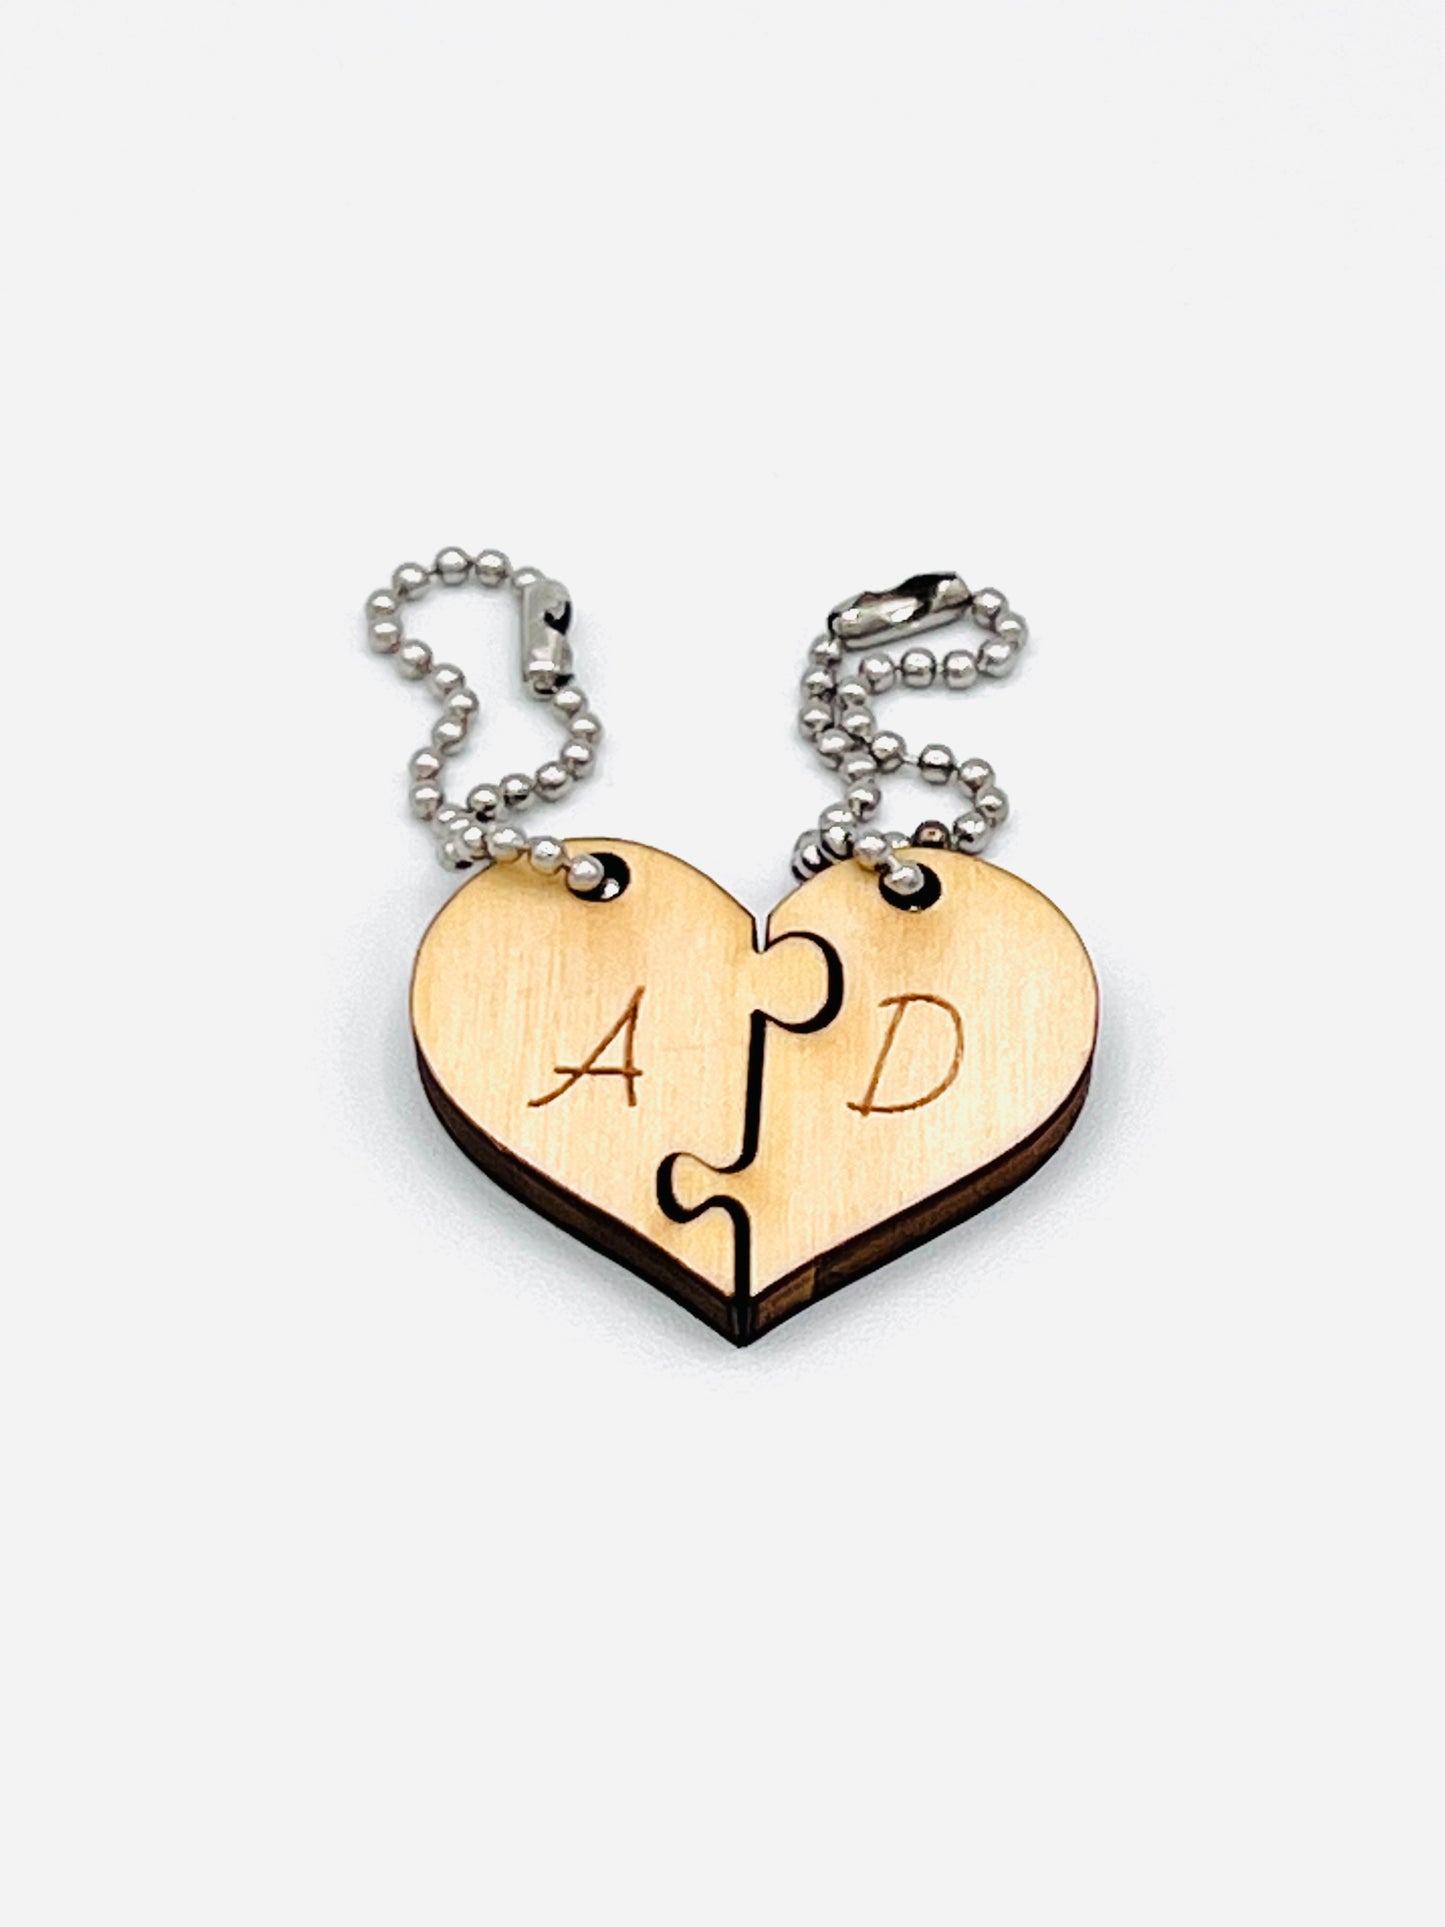 Split Heart Personalized Wood Engraved Keychain (Set of 2 Half-Hearts)